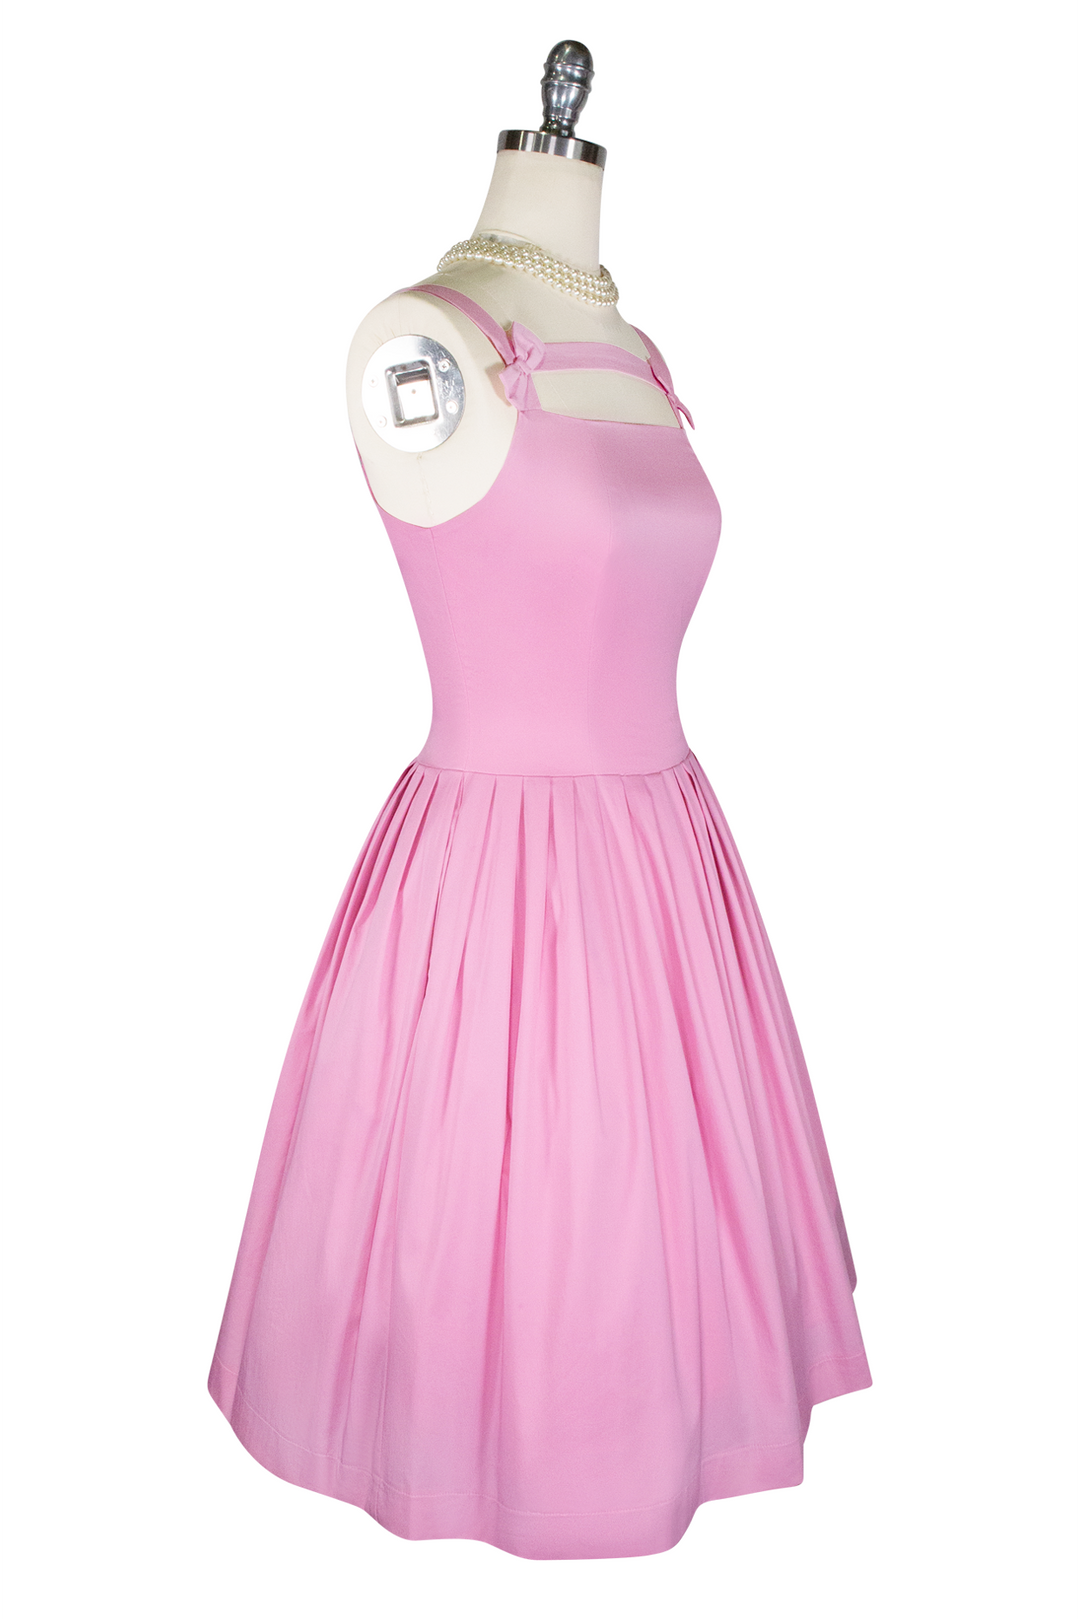 French Vacation Bow Dress - Kitten D'Amour